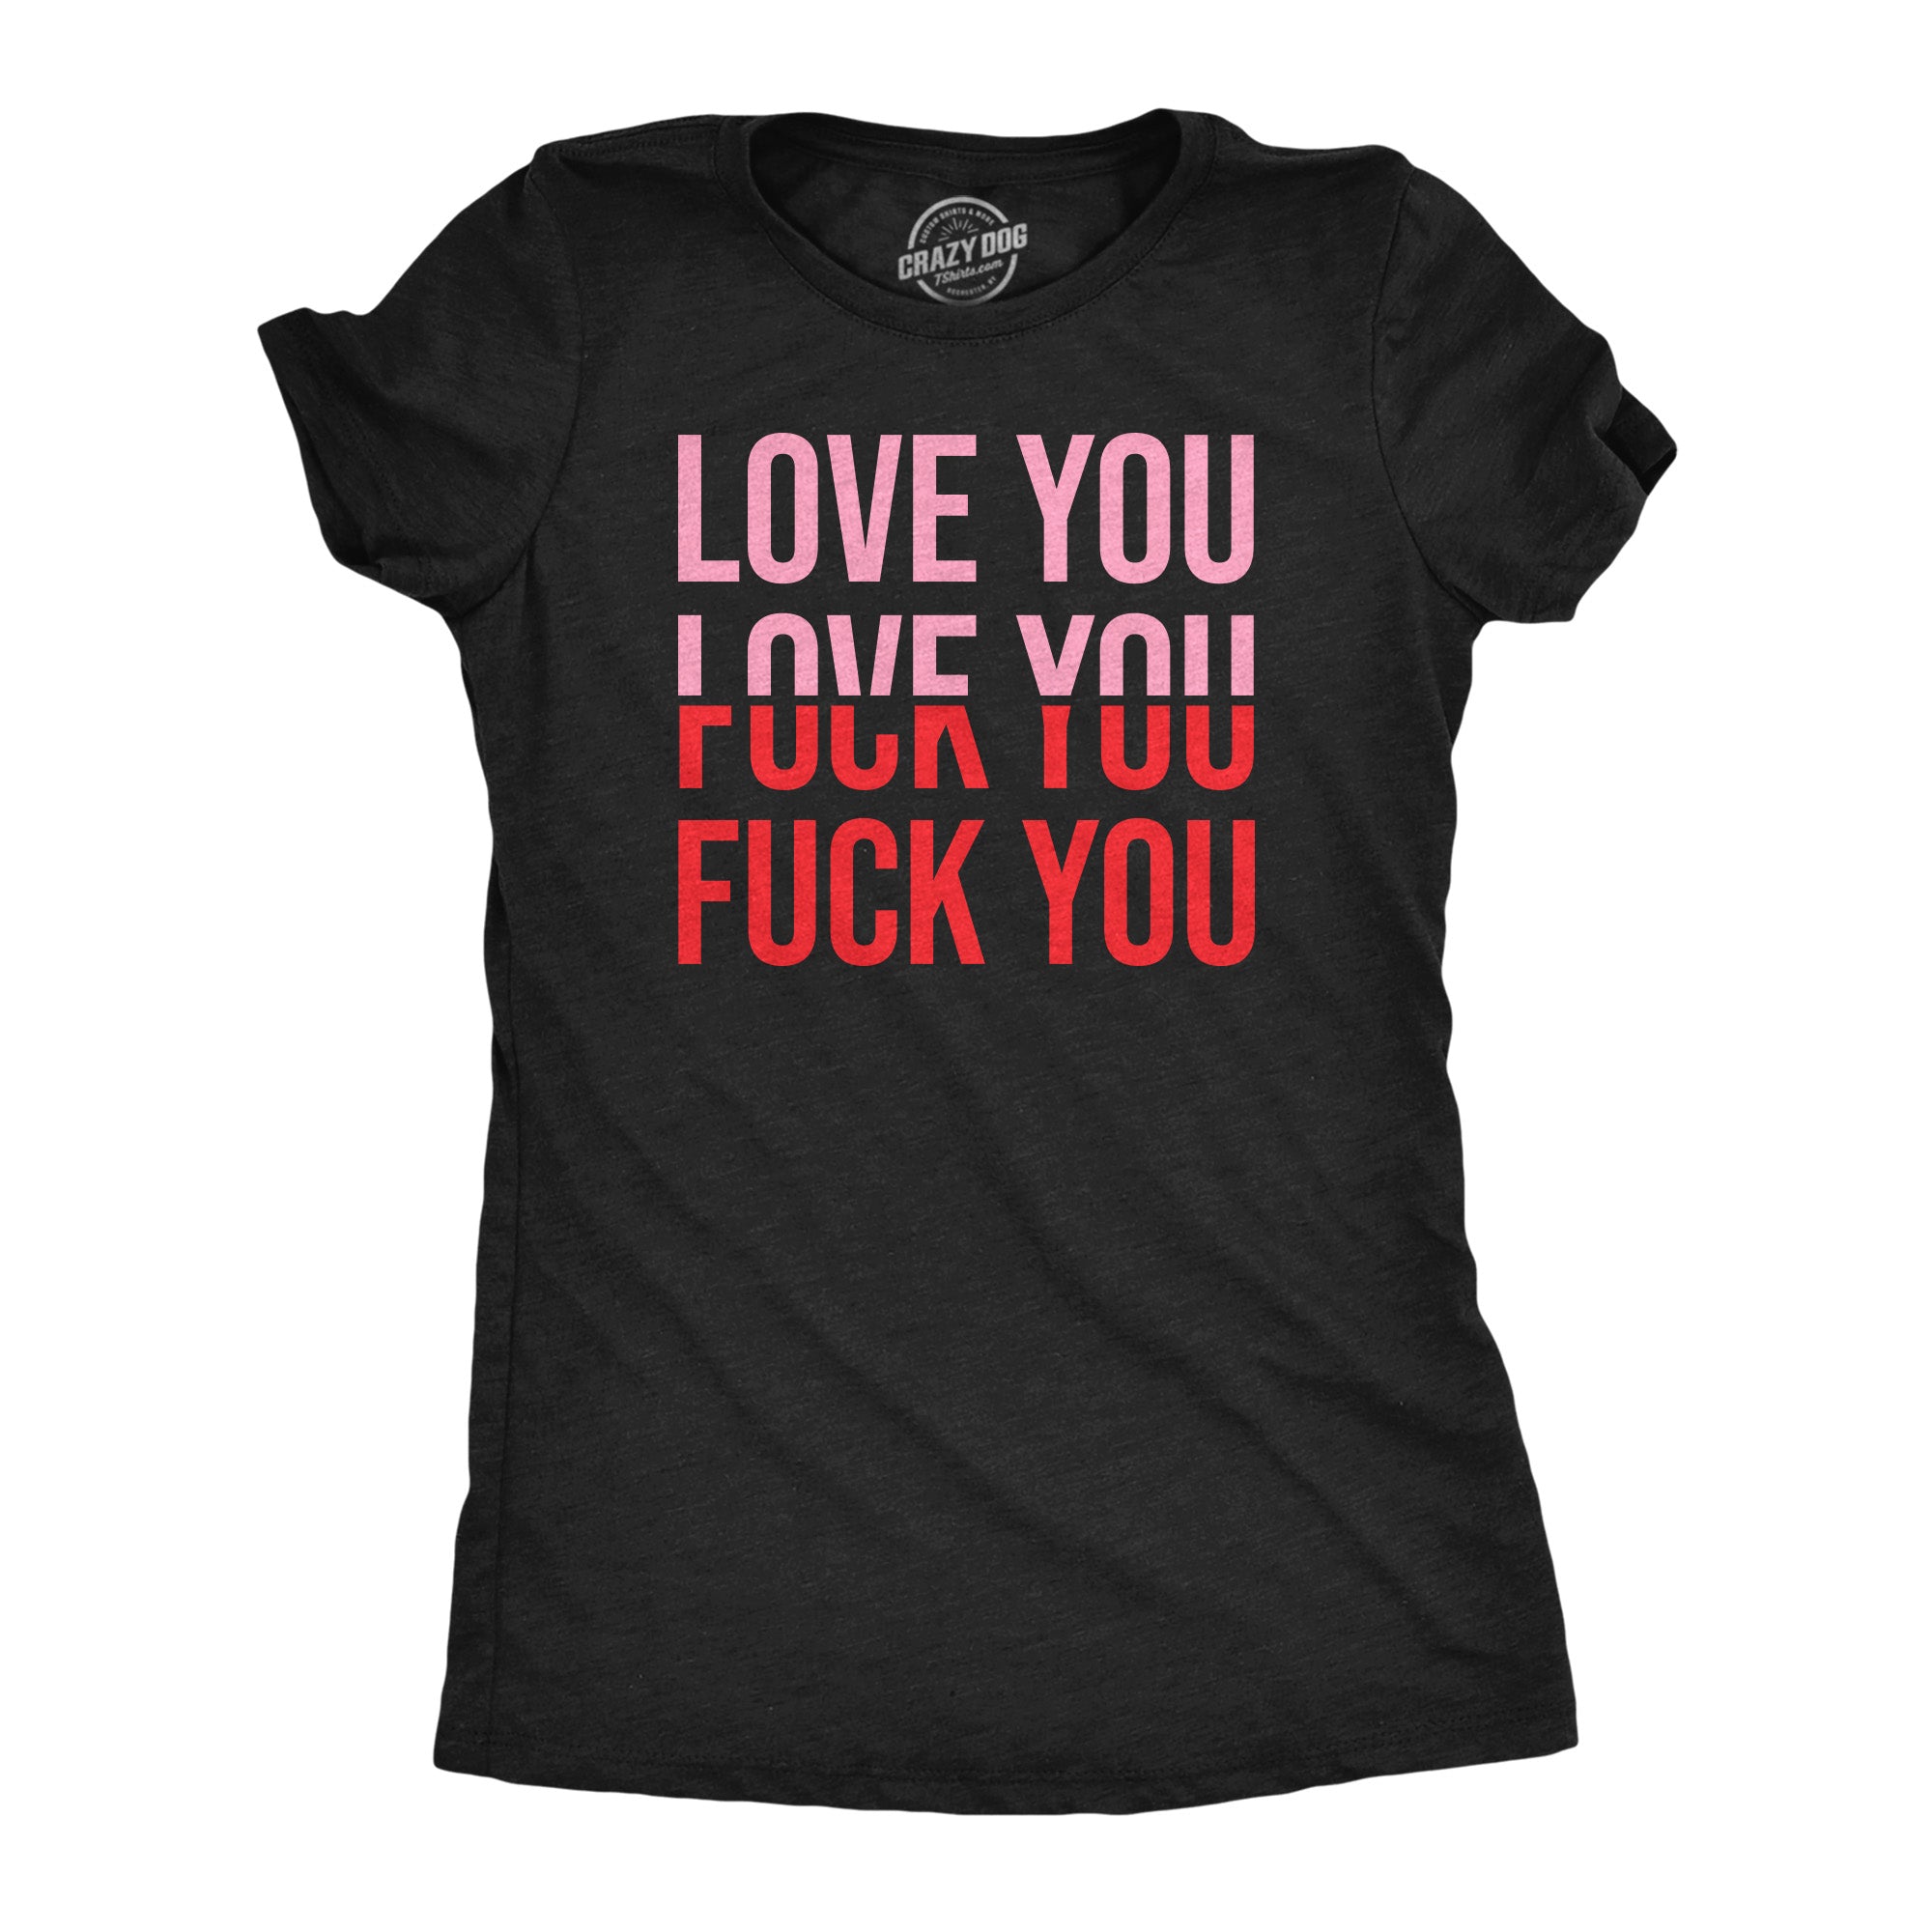 Funny Heather Black - Love You Fuck You Love You Fuck You Womens T Shirt Nerdy Valentine's Day Sarcastic Tee